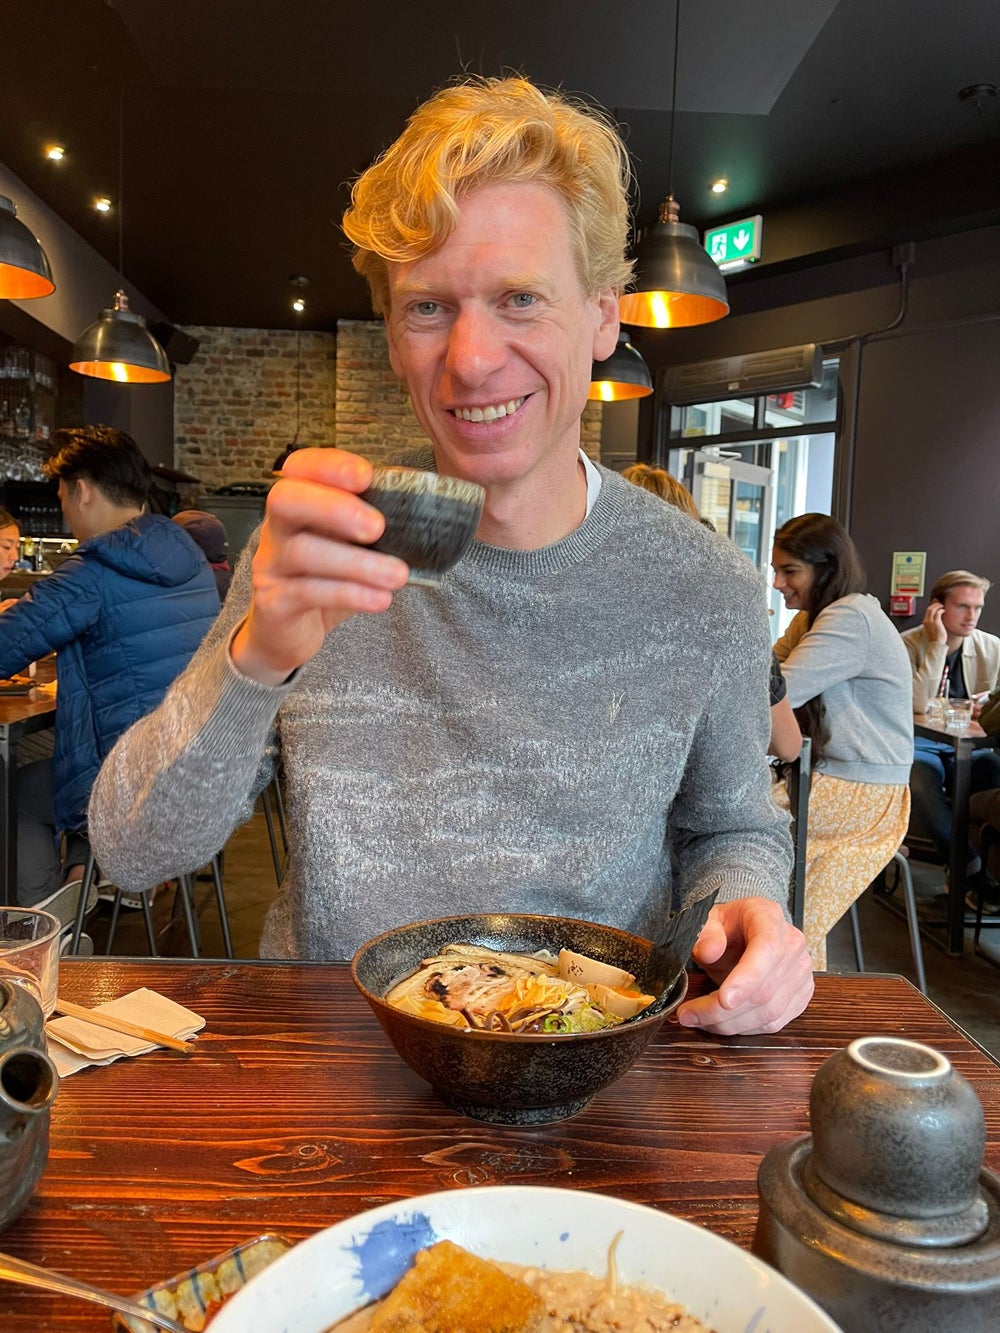 Gavin eating ramen on a night out (Collect/PA Real Life)